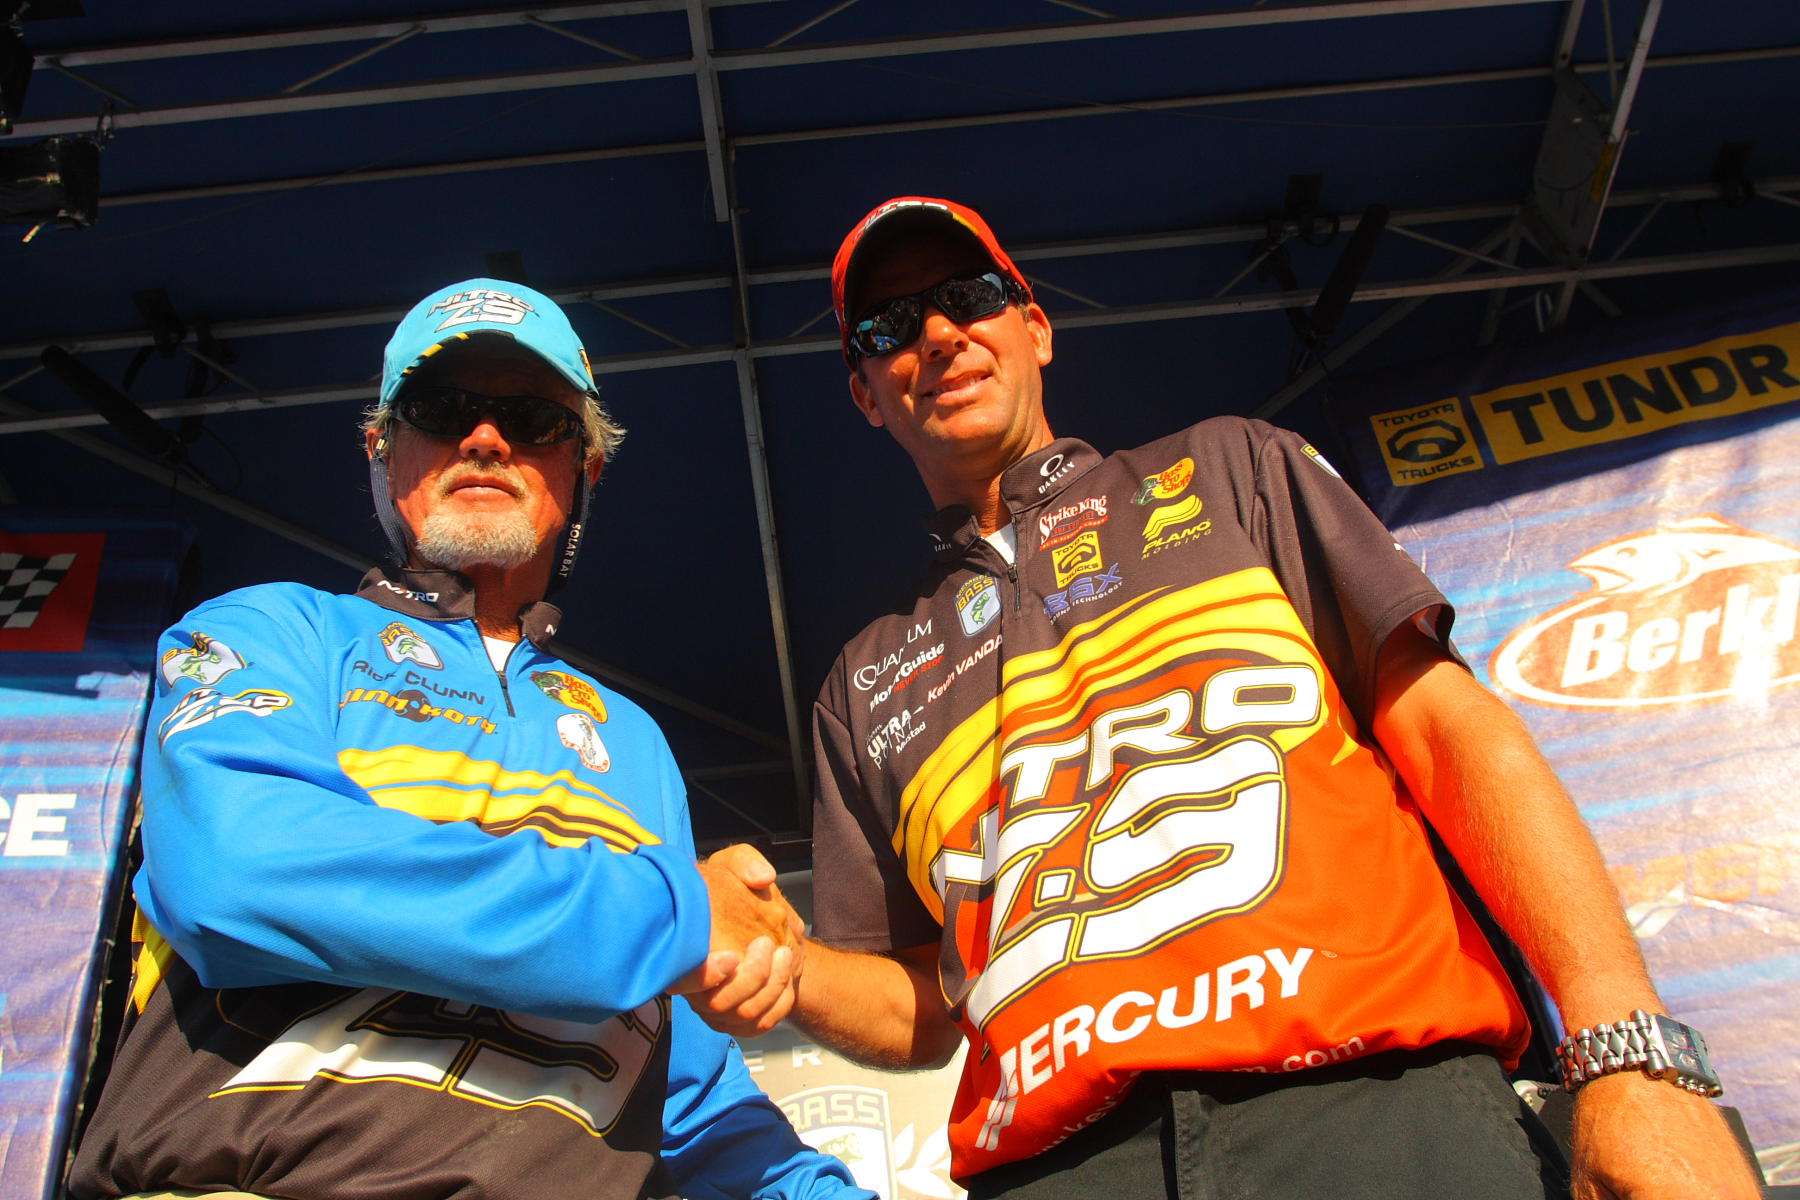 Old school met new school on the tournament waters. There was no doubt a new generation of angler had arrived, succeeded and driven bass fishing's popularity.